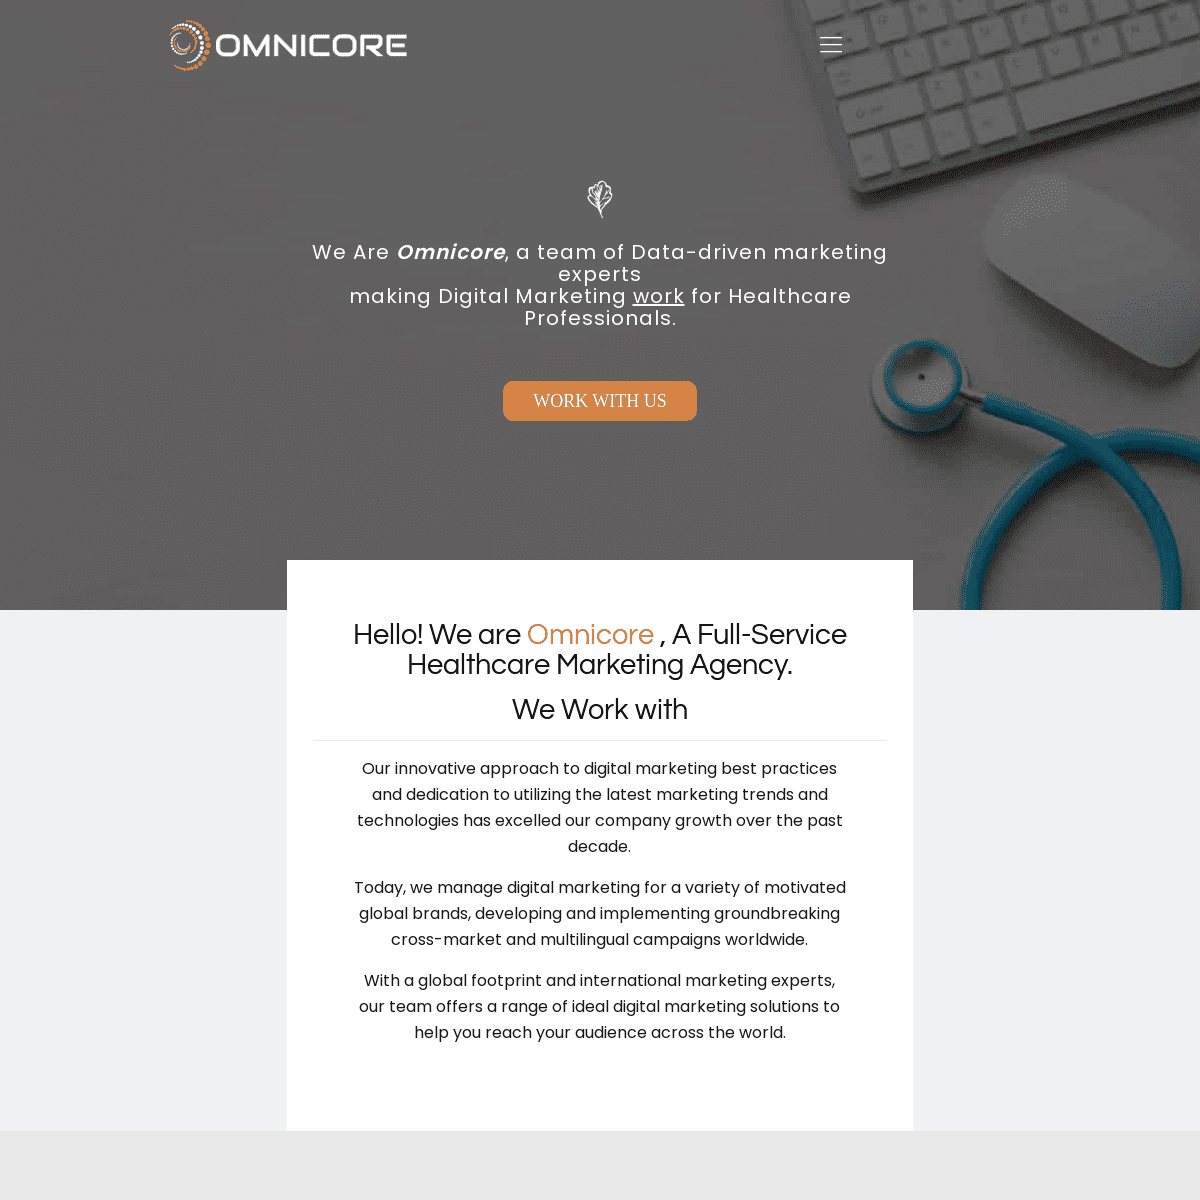 A complete backup of https://omnicoreagency.com